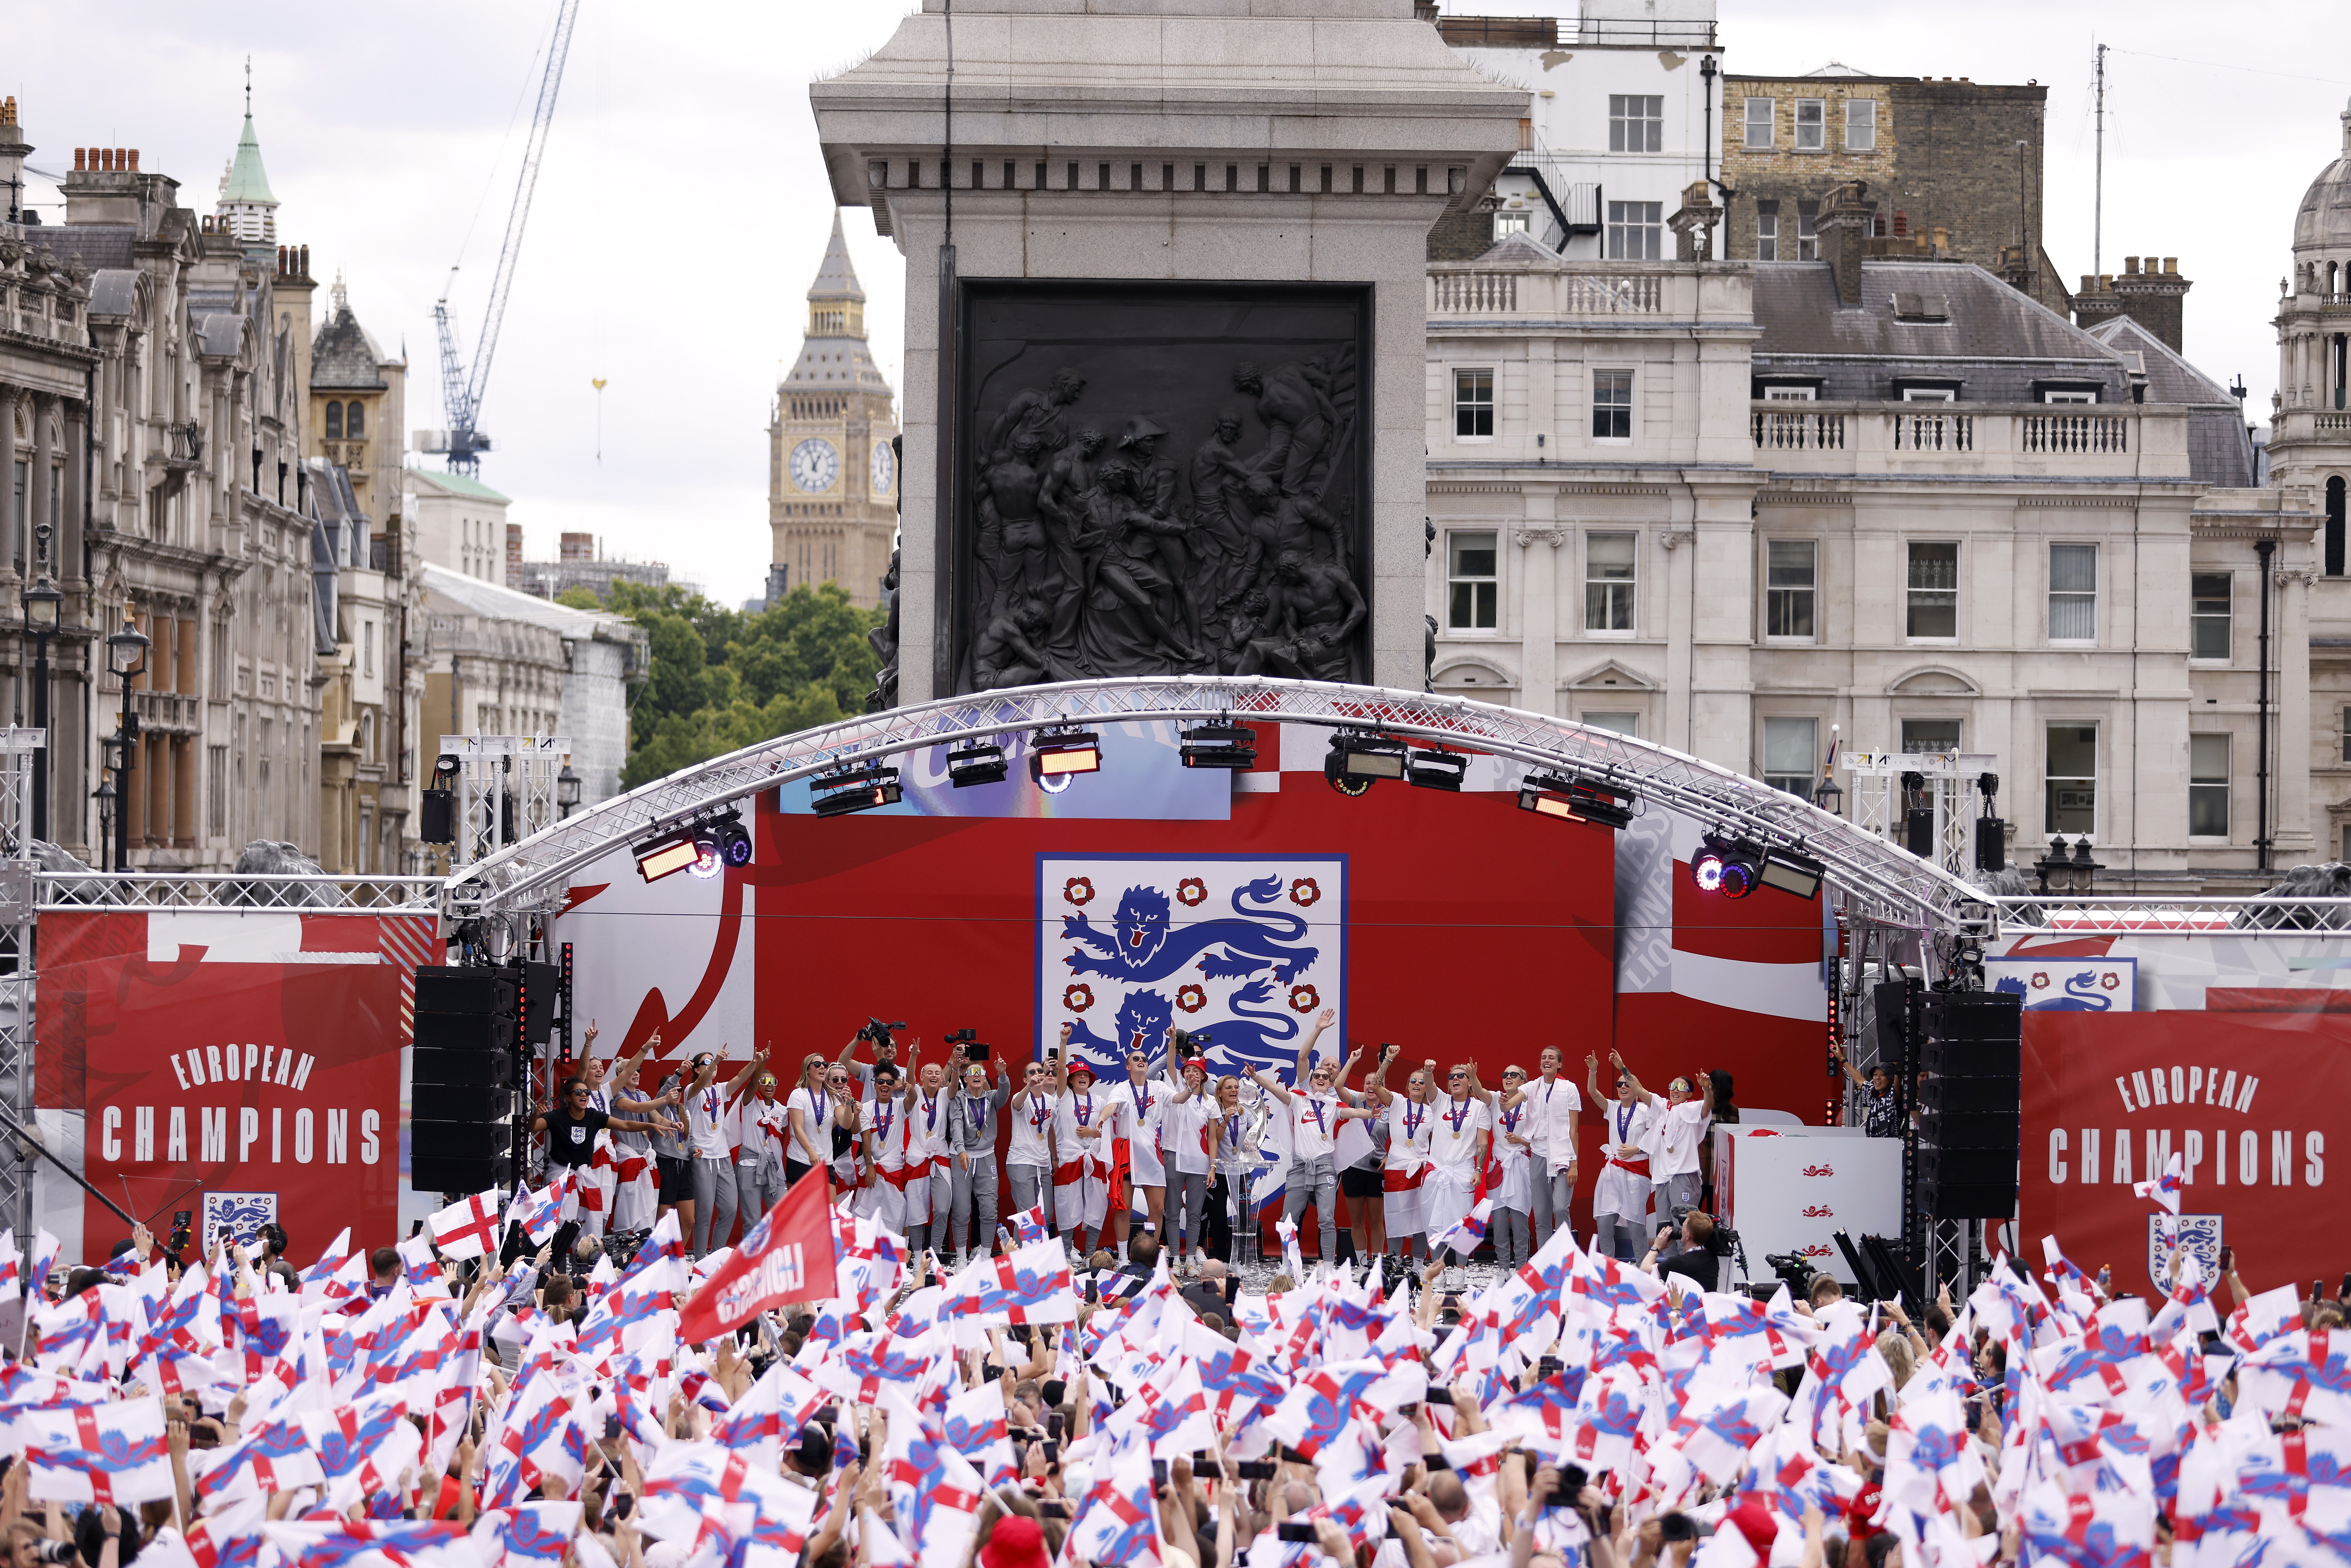 England players sing with supporters in Trafalgar Square (Steven Paston/PA)